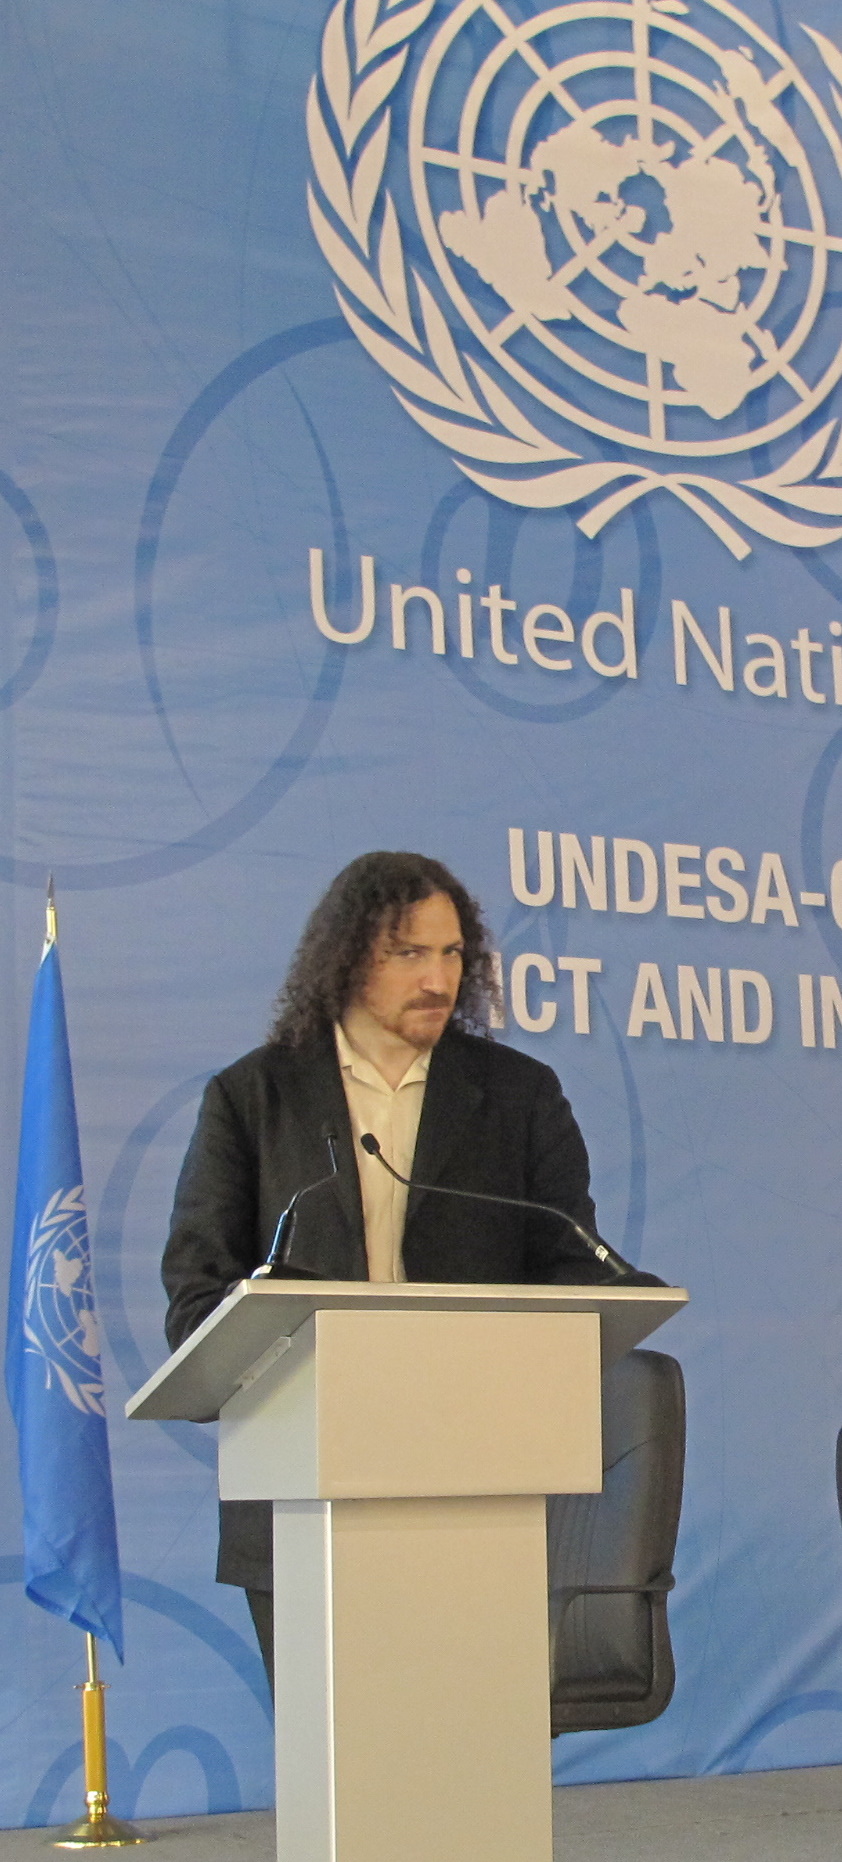 Photo of David Berman at the podium on a stage decorated with United Nations UNDESA and GAID branding